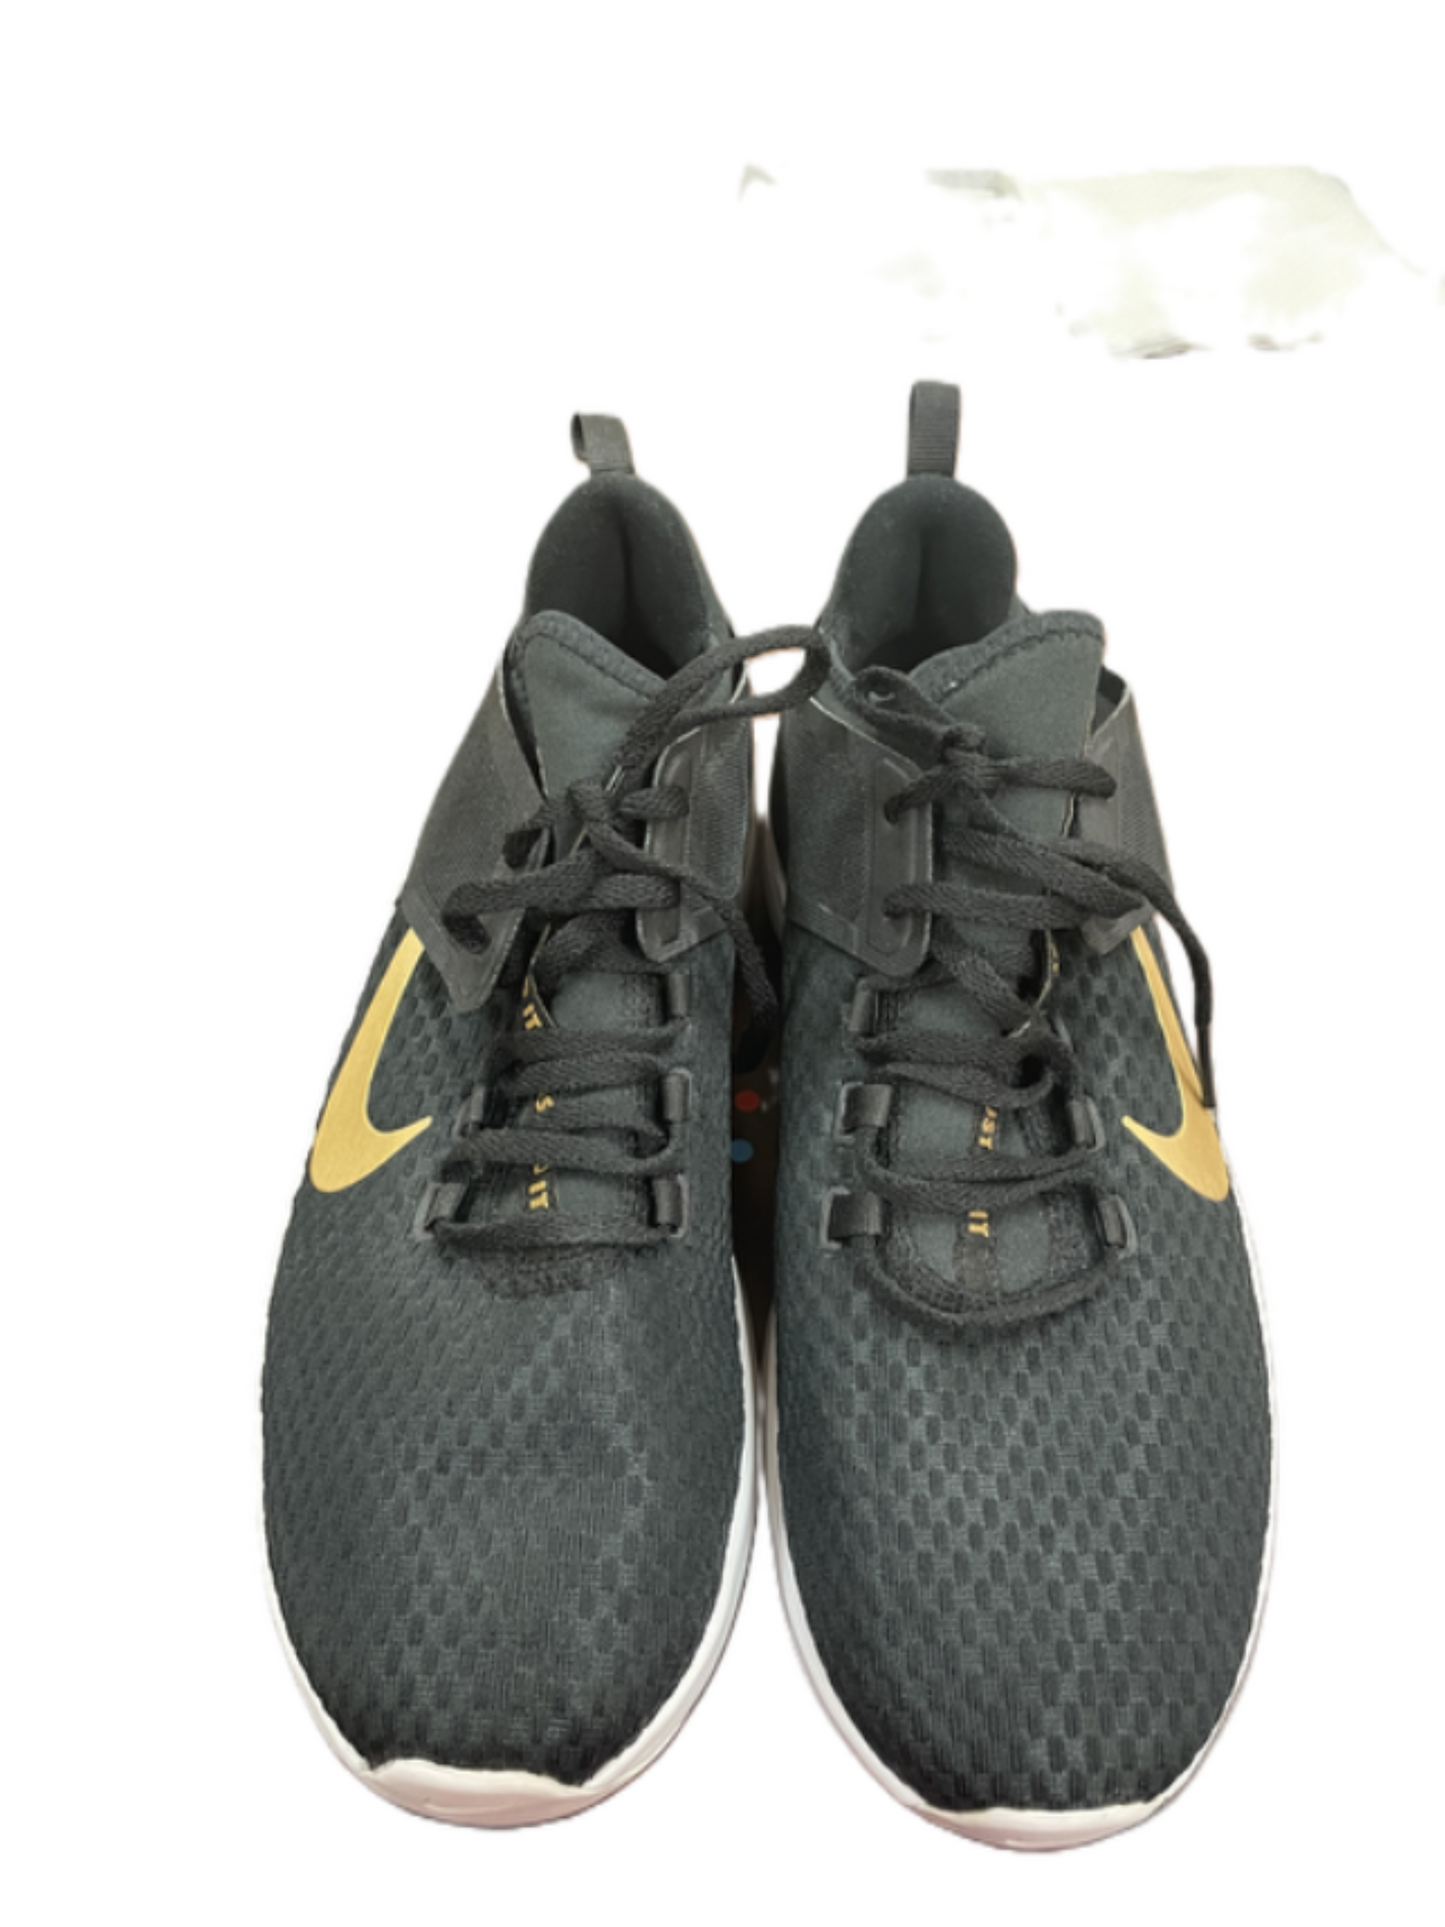 Shoes Athletic By Nike  Size: 10.5